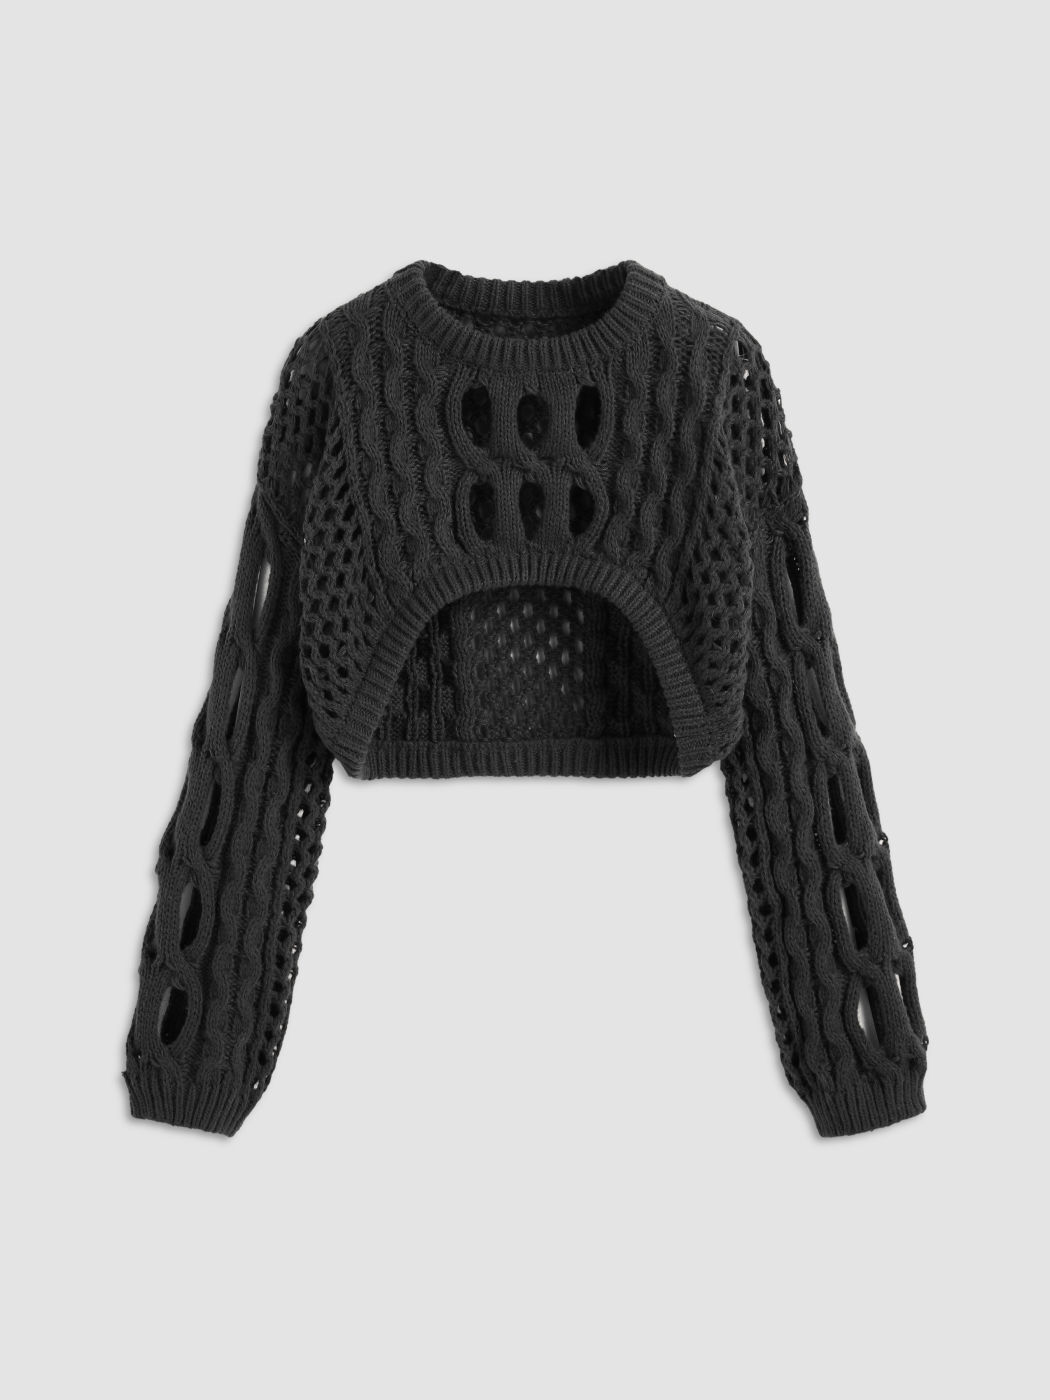 KNIT ROUND NECKLINE HOLLOW OUT LONG SLEEVE CROP TOP